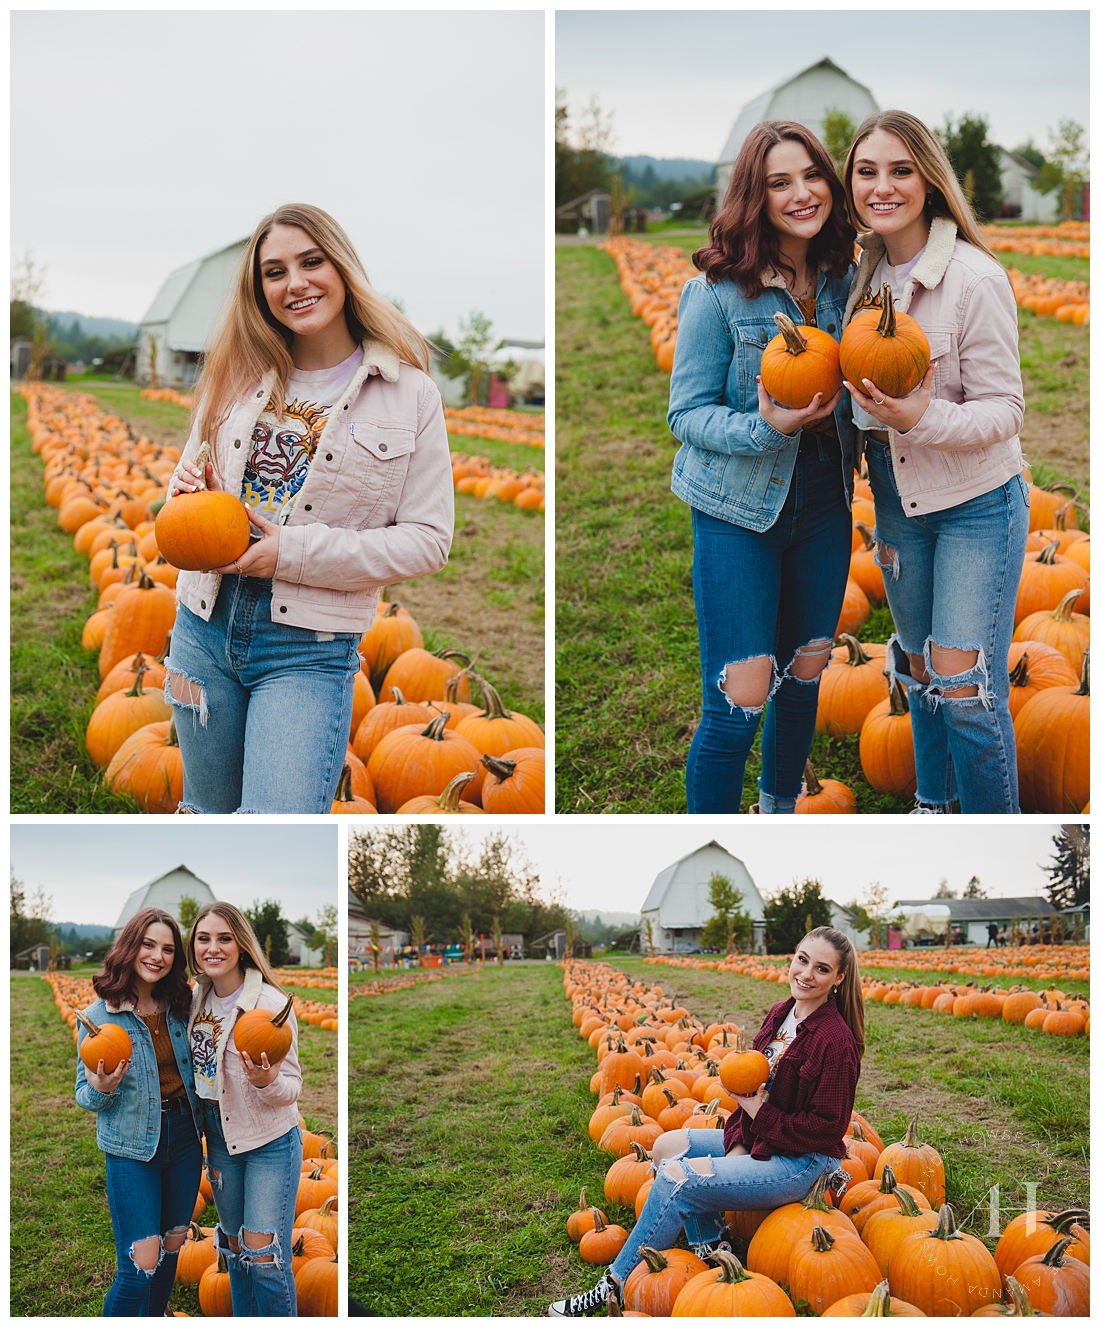 BFF Portraits at the Farm | Double R Farms in Puyallup | Senior Girl Pose Ideas, Friendship Shoots, Outfit Ideas | Photographed by Tacoma Senior Photographer Amanda Howse